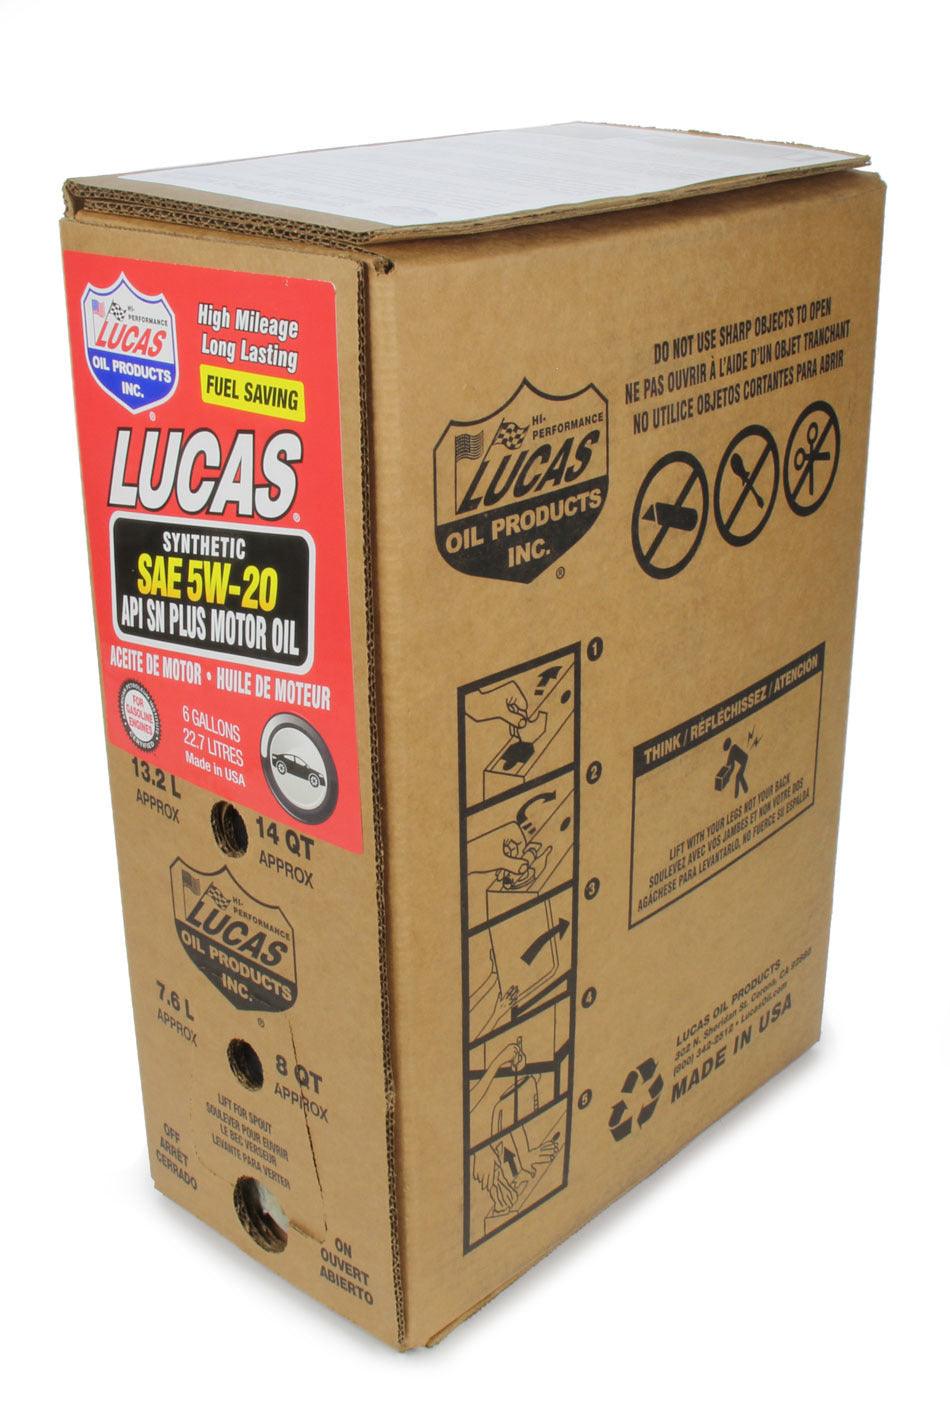 Synthetic SAE 5W20 Oil 6 Gallon Bag In Box - Burlile Performance Products